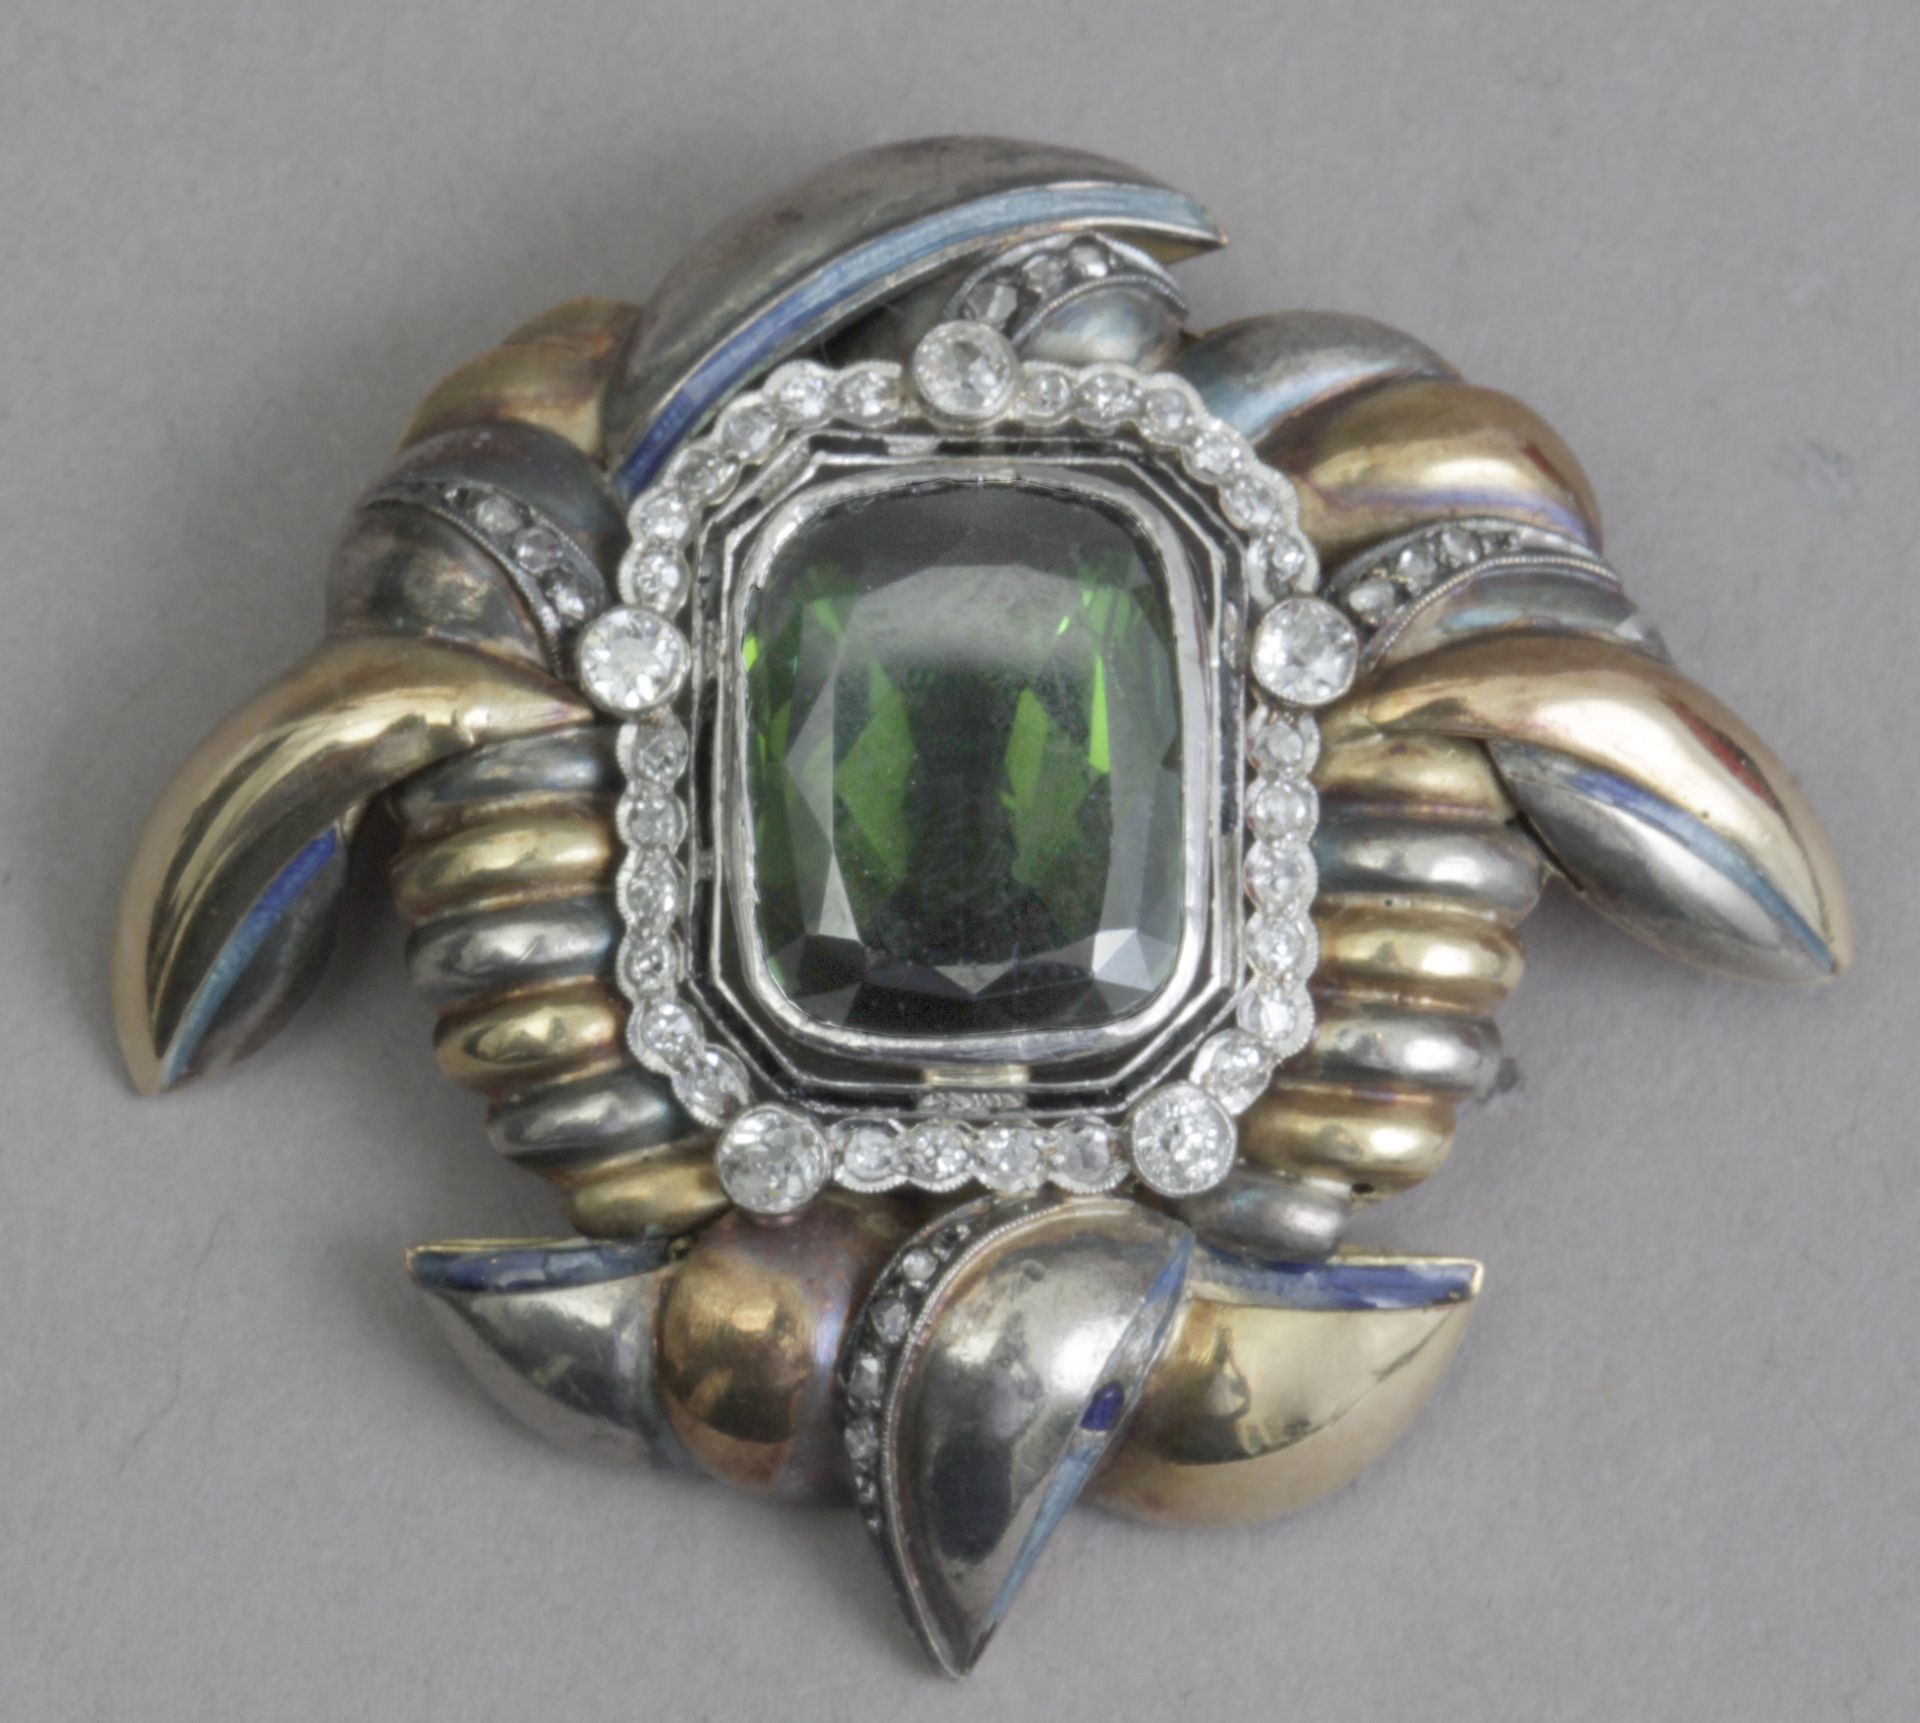 A first half of 20th century tourmaline and diamond brooch - Image 2 of 4